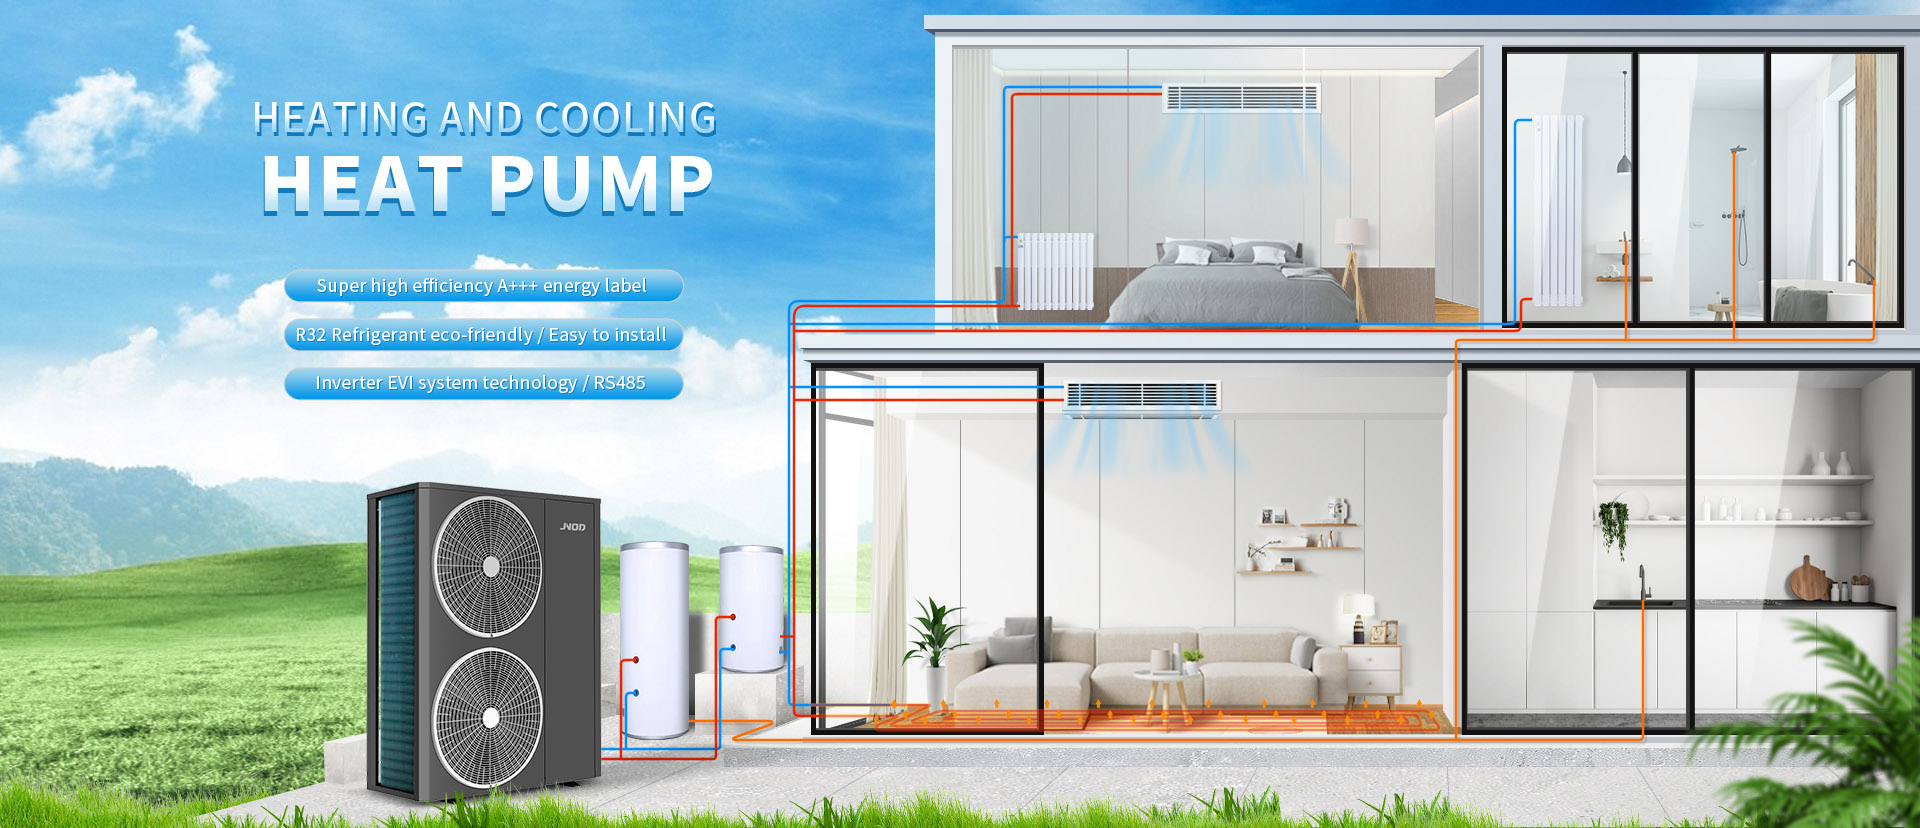 Industrial Heating And Cooling Heat Pump